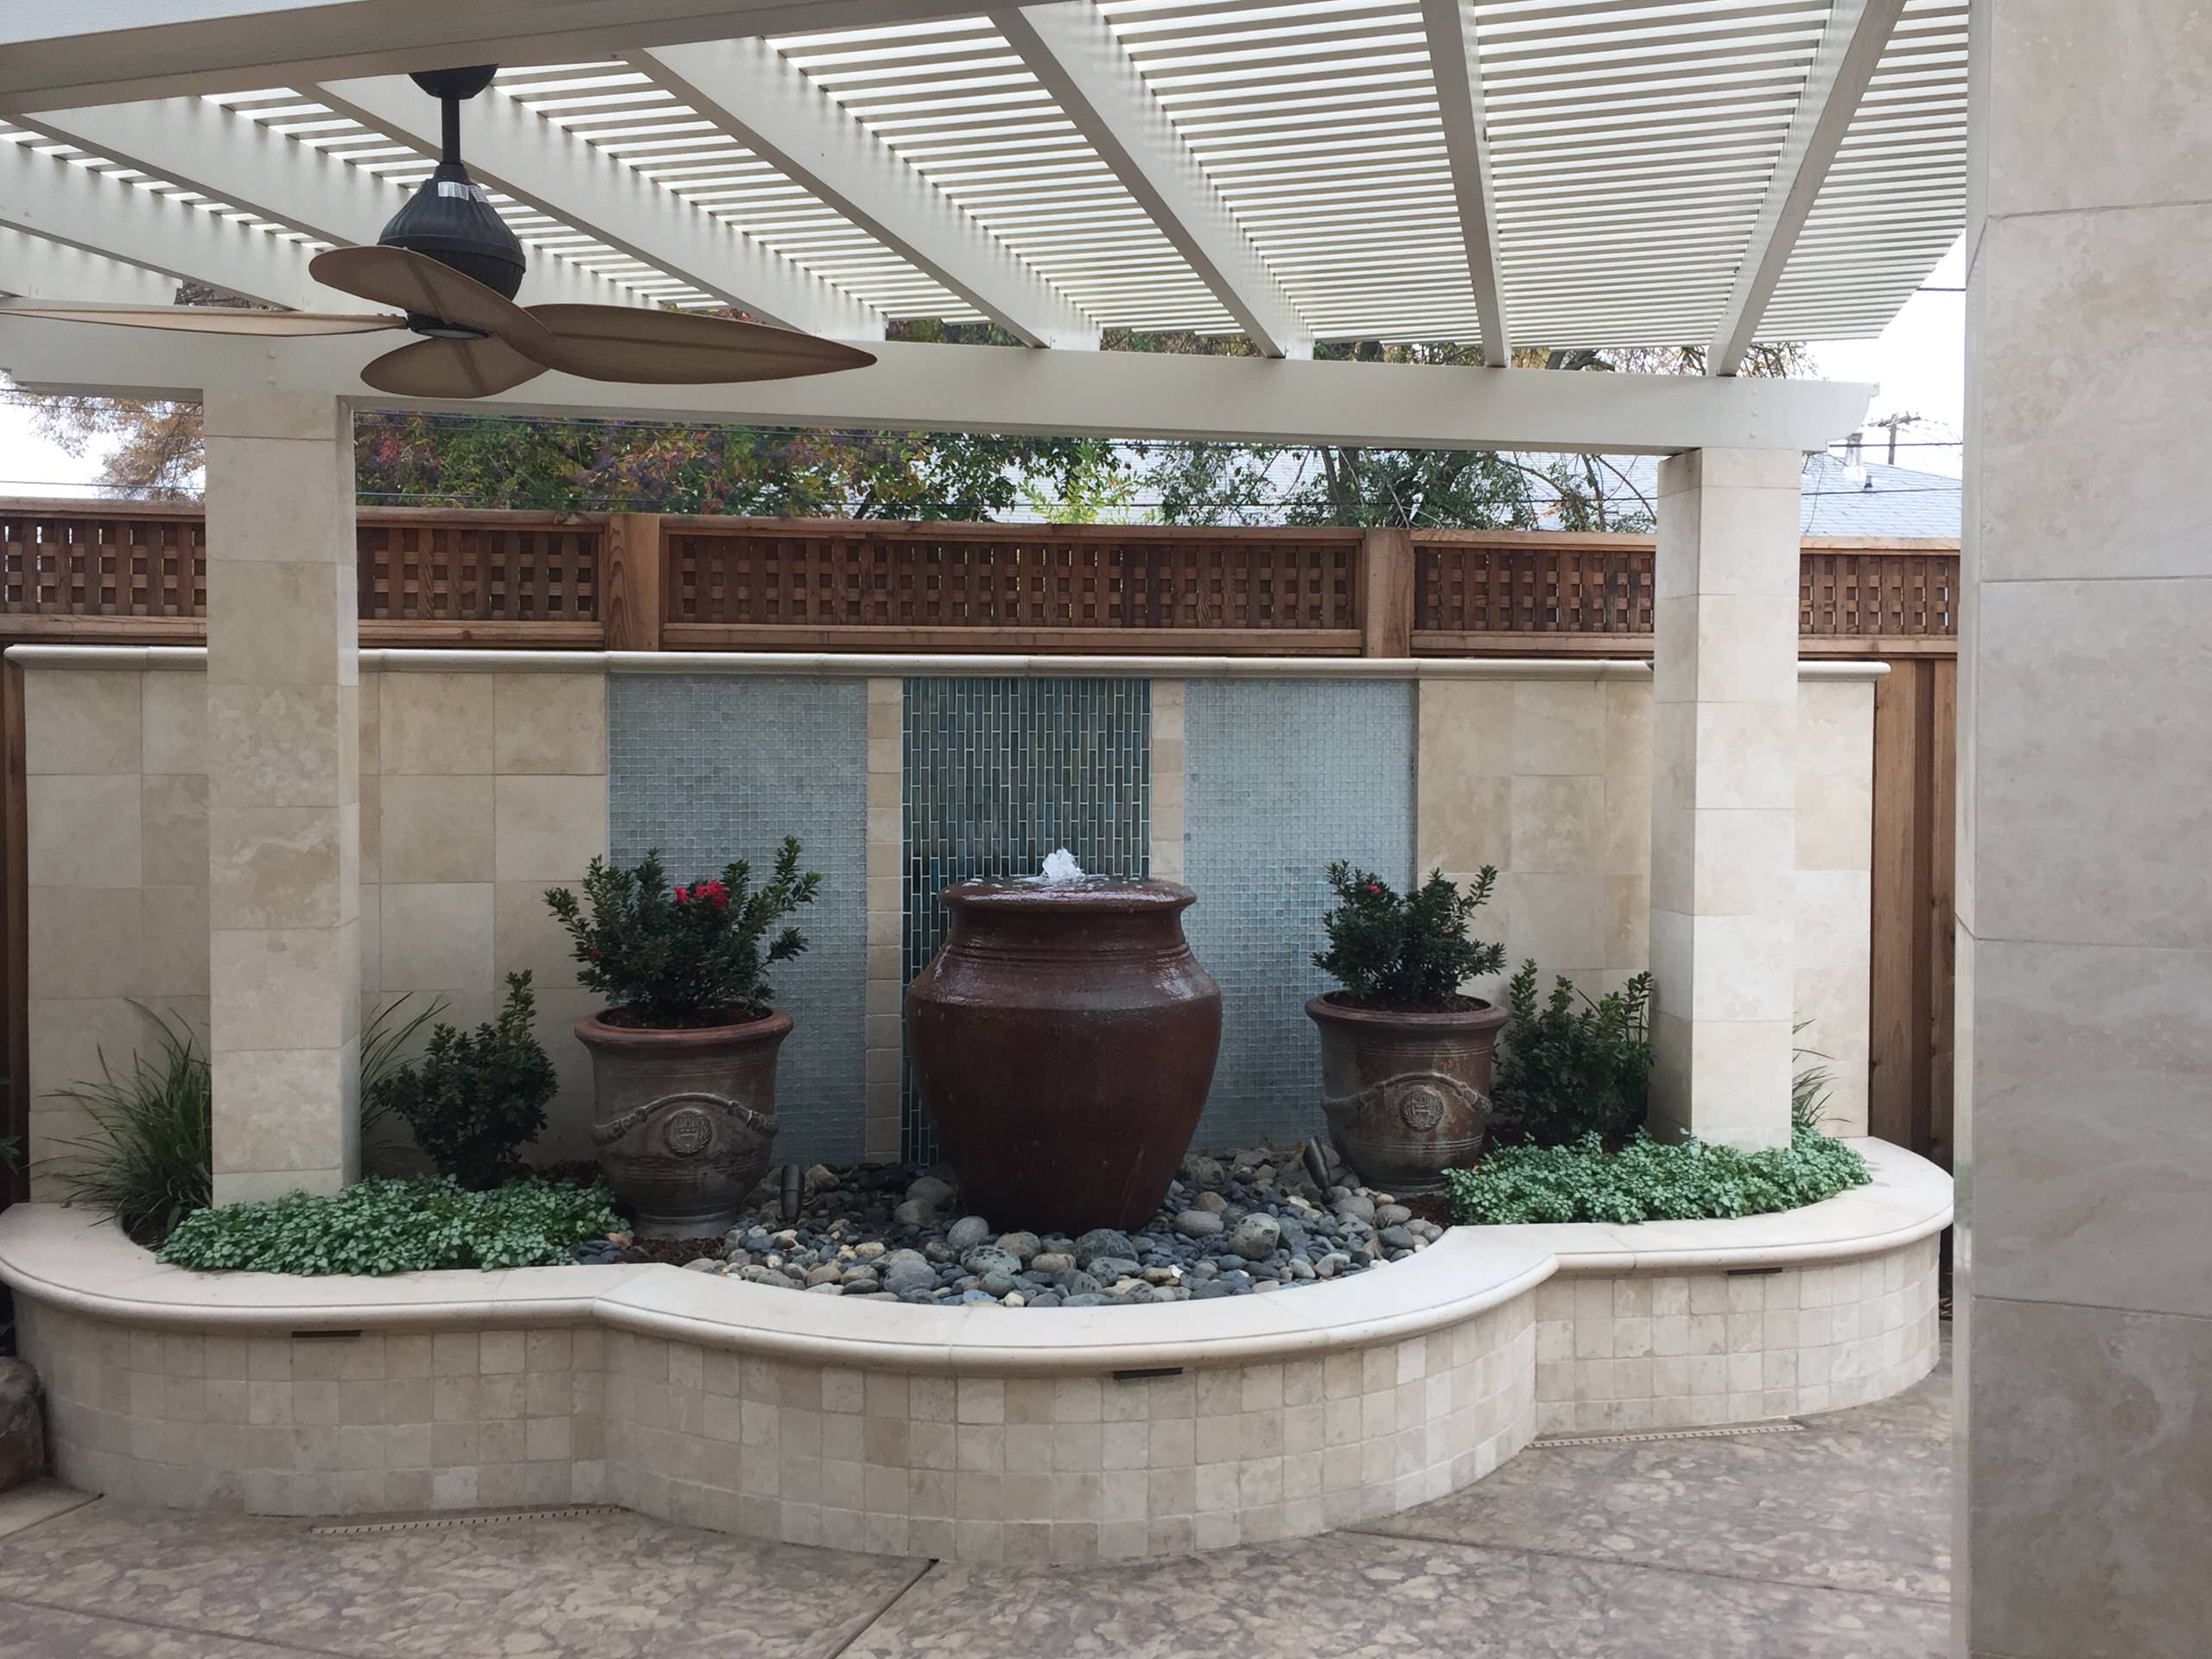 Pots and Water Features